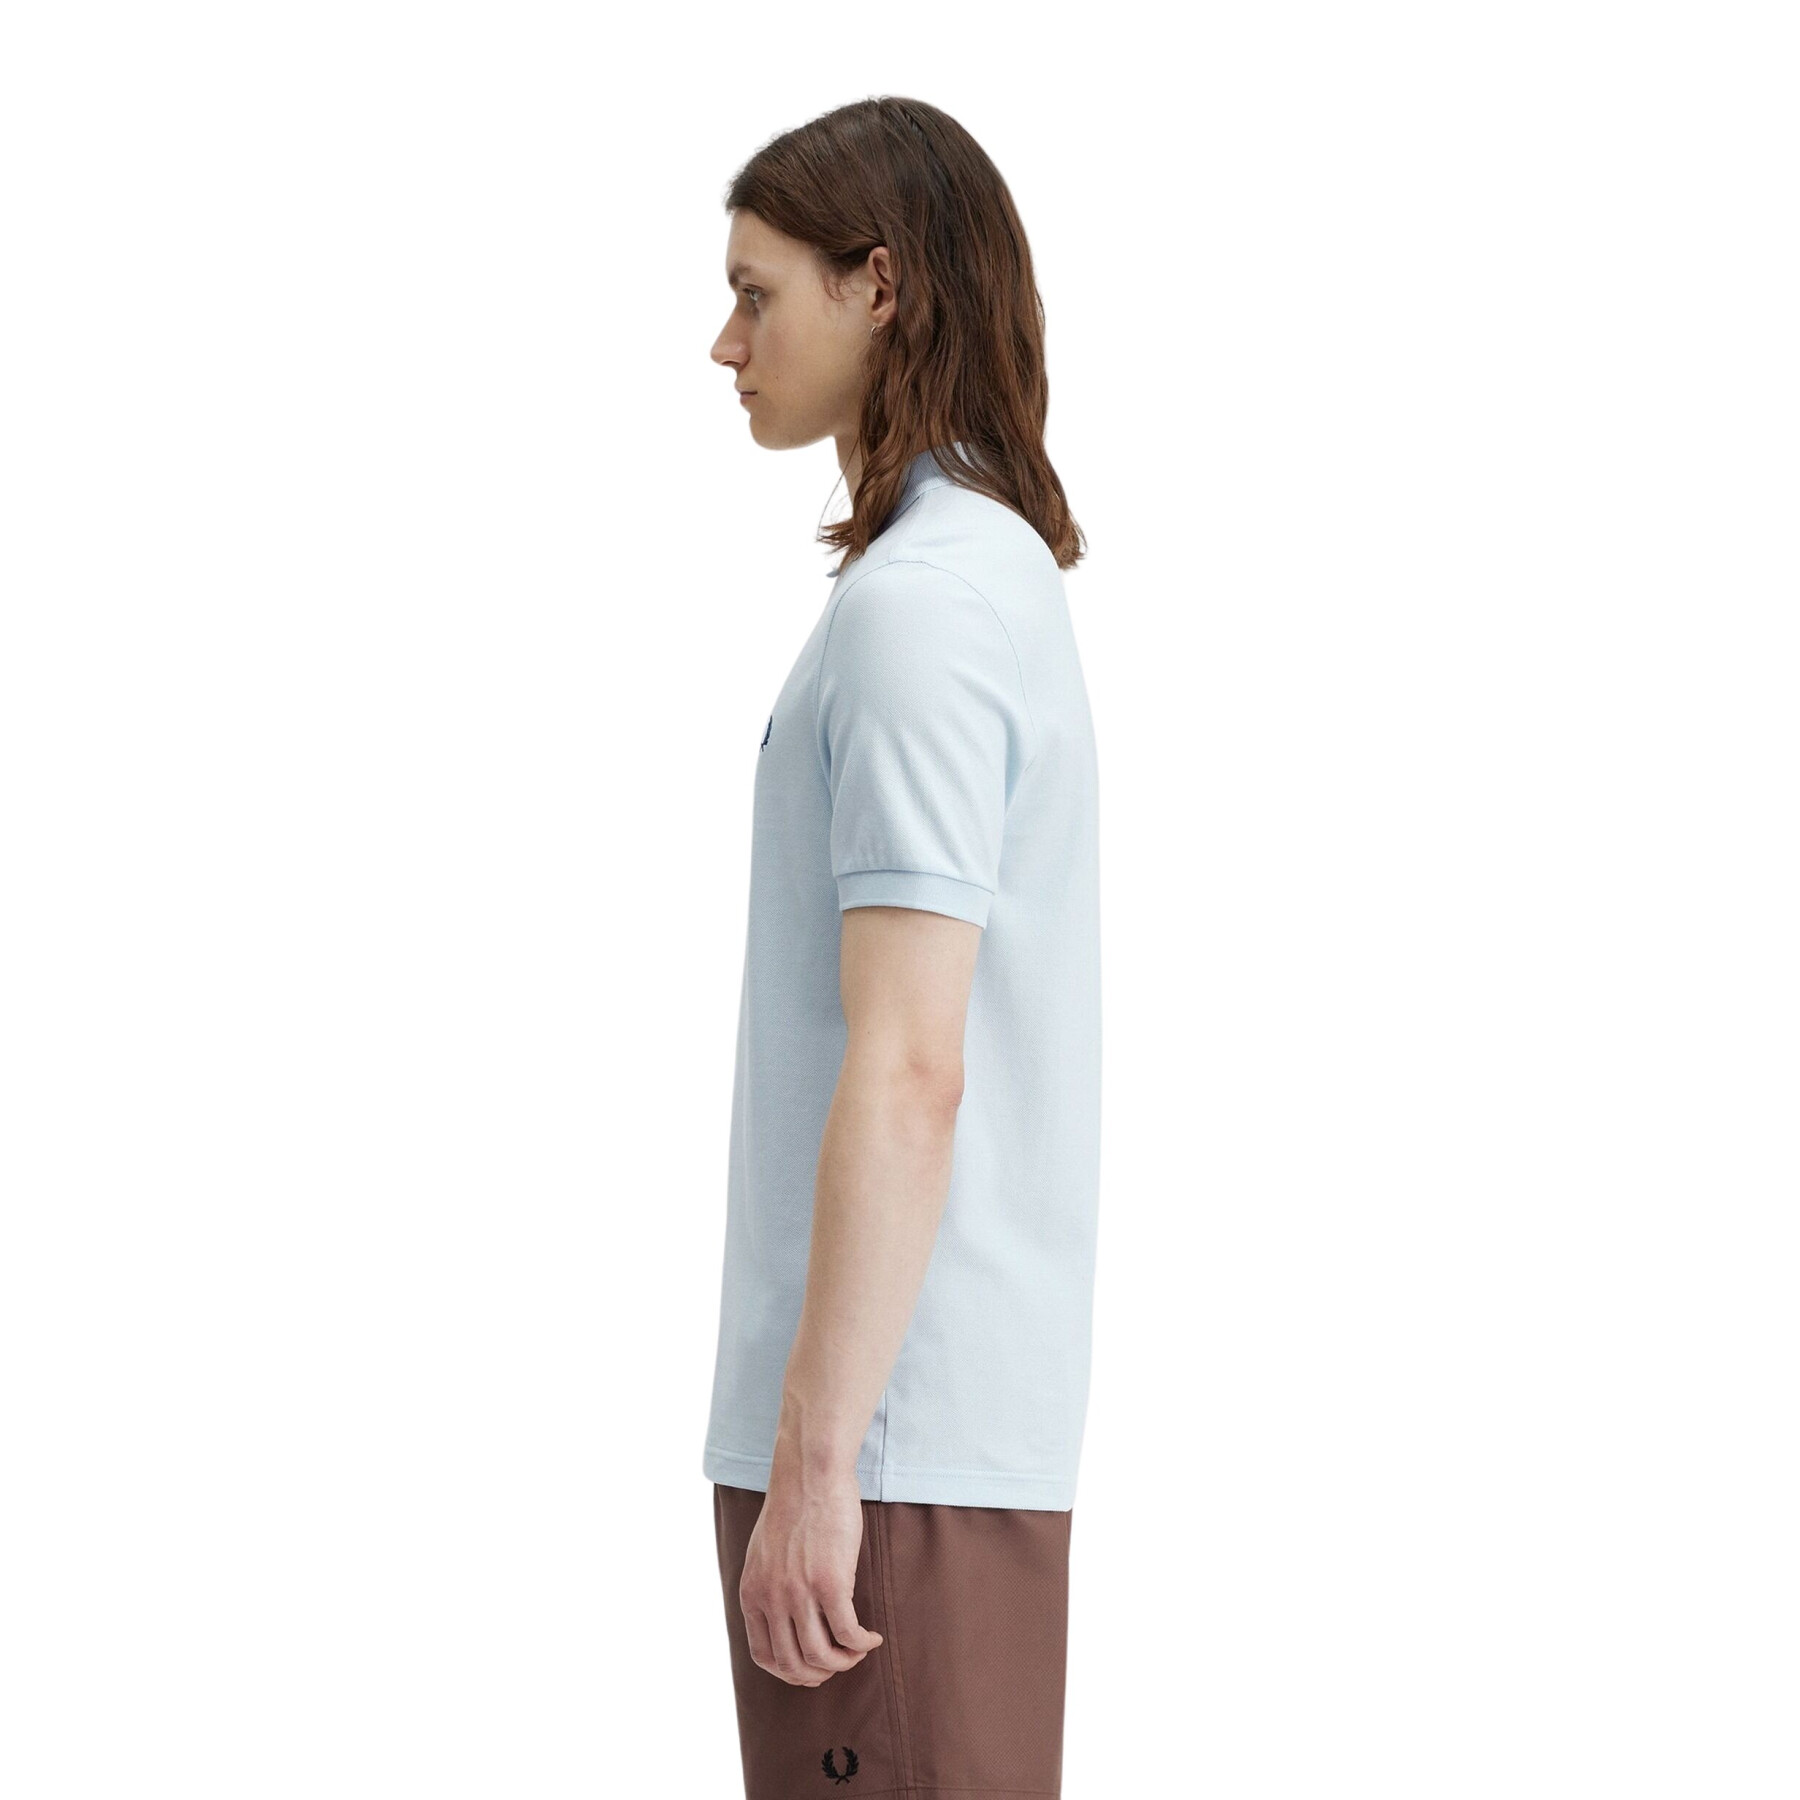 Polo Fred Perry Plain